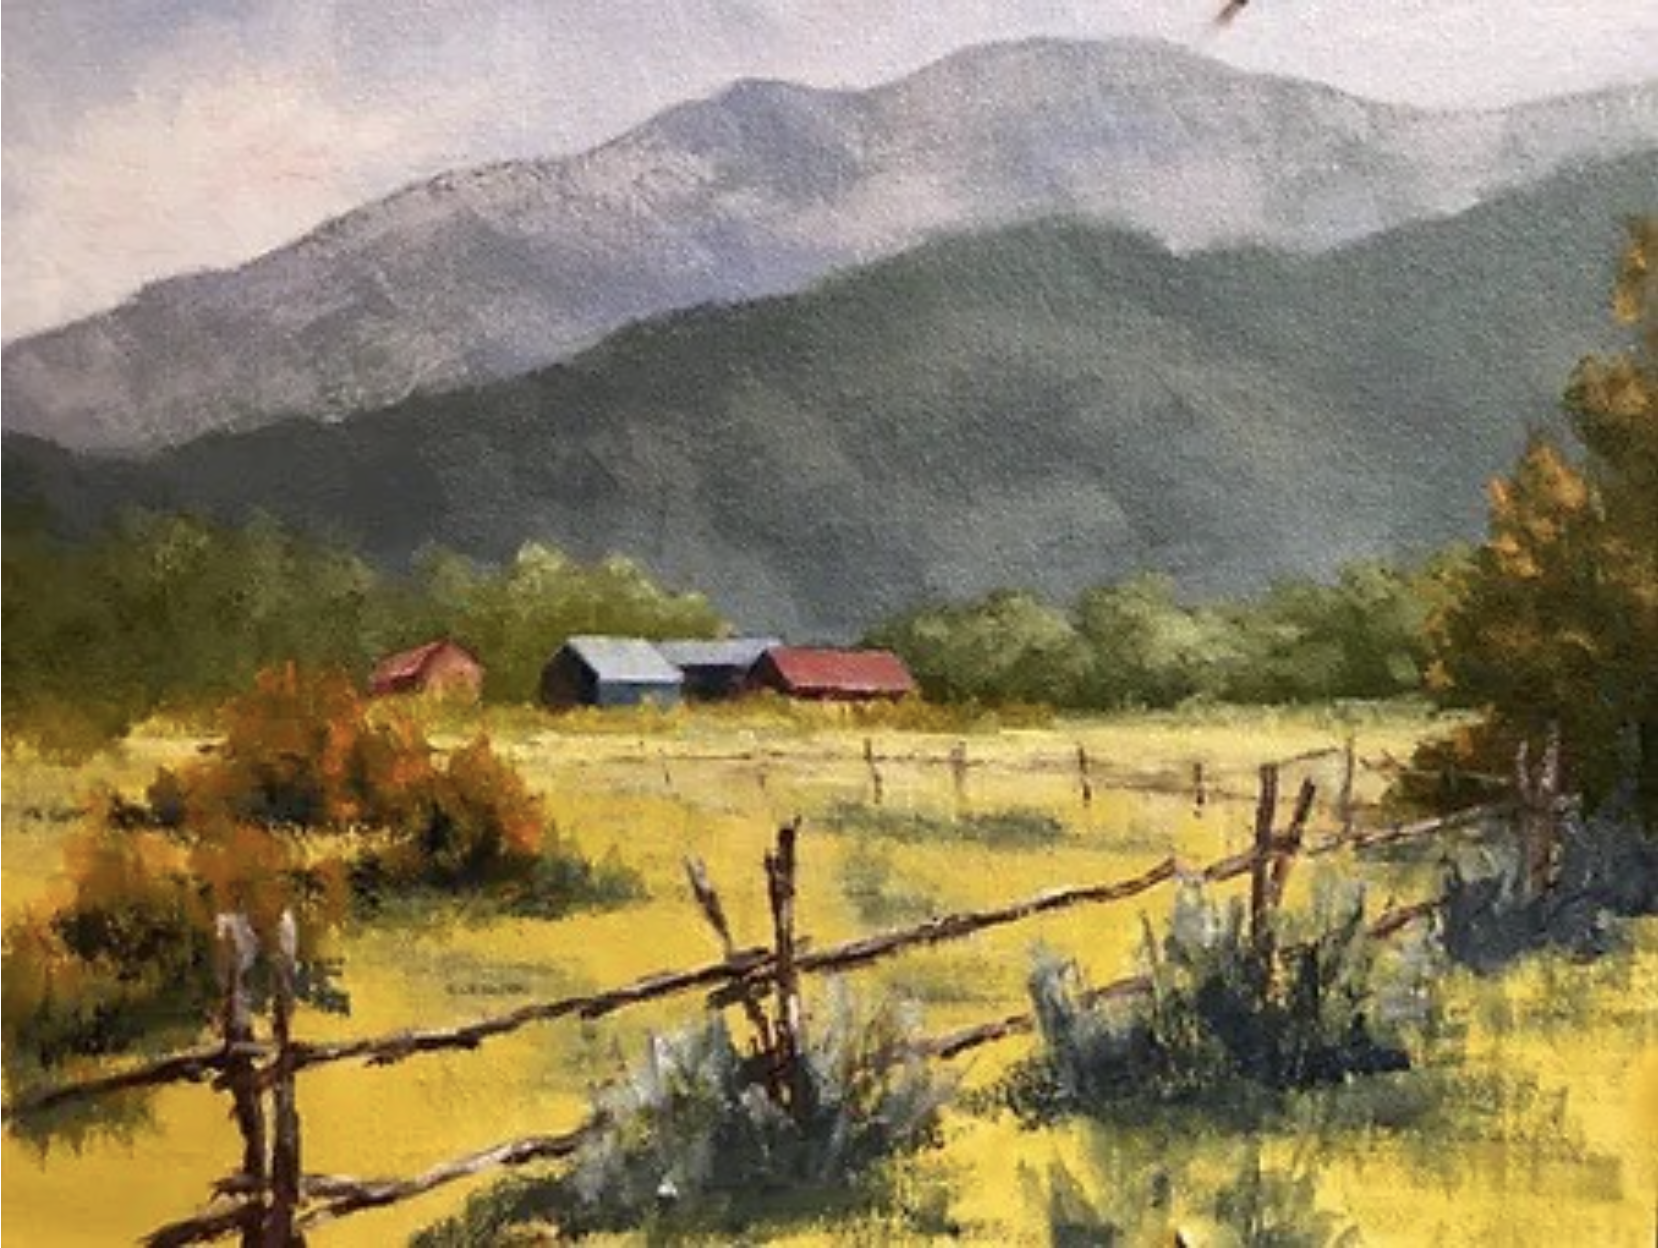 Image: Painting of Rural Scenery